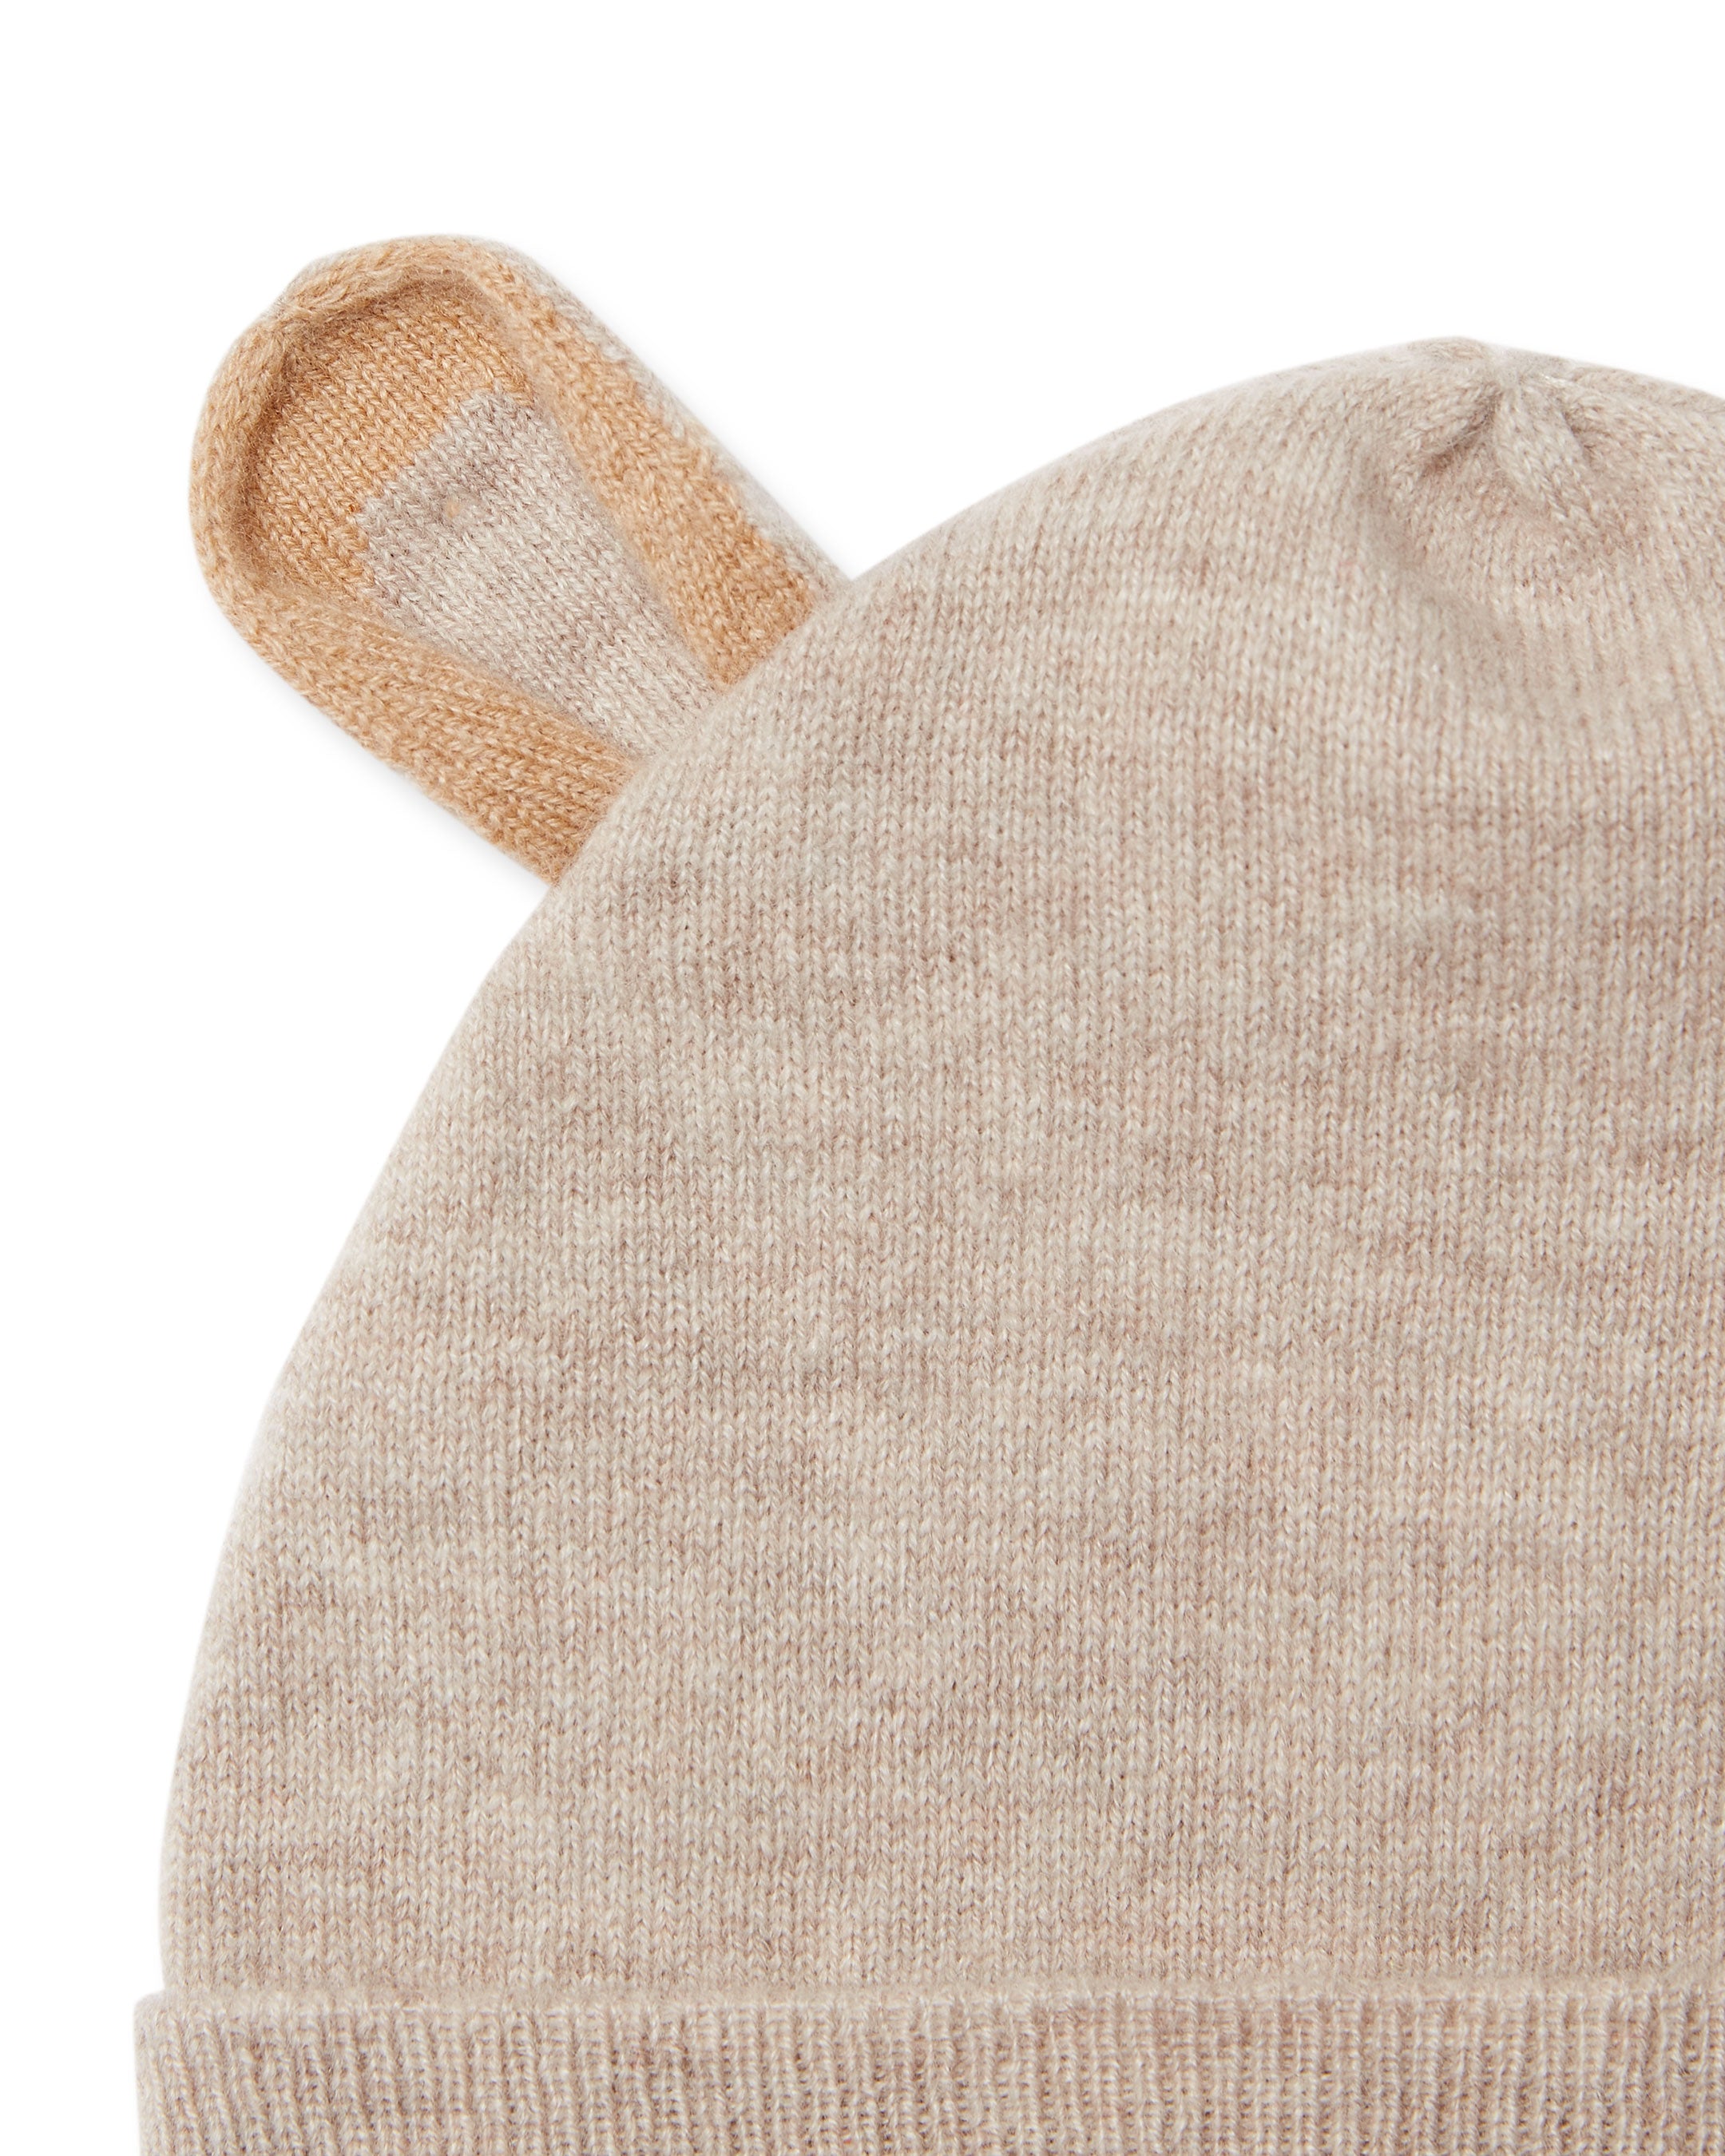 N.PEAL KIDS knitted organic cashmere hat - Blue